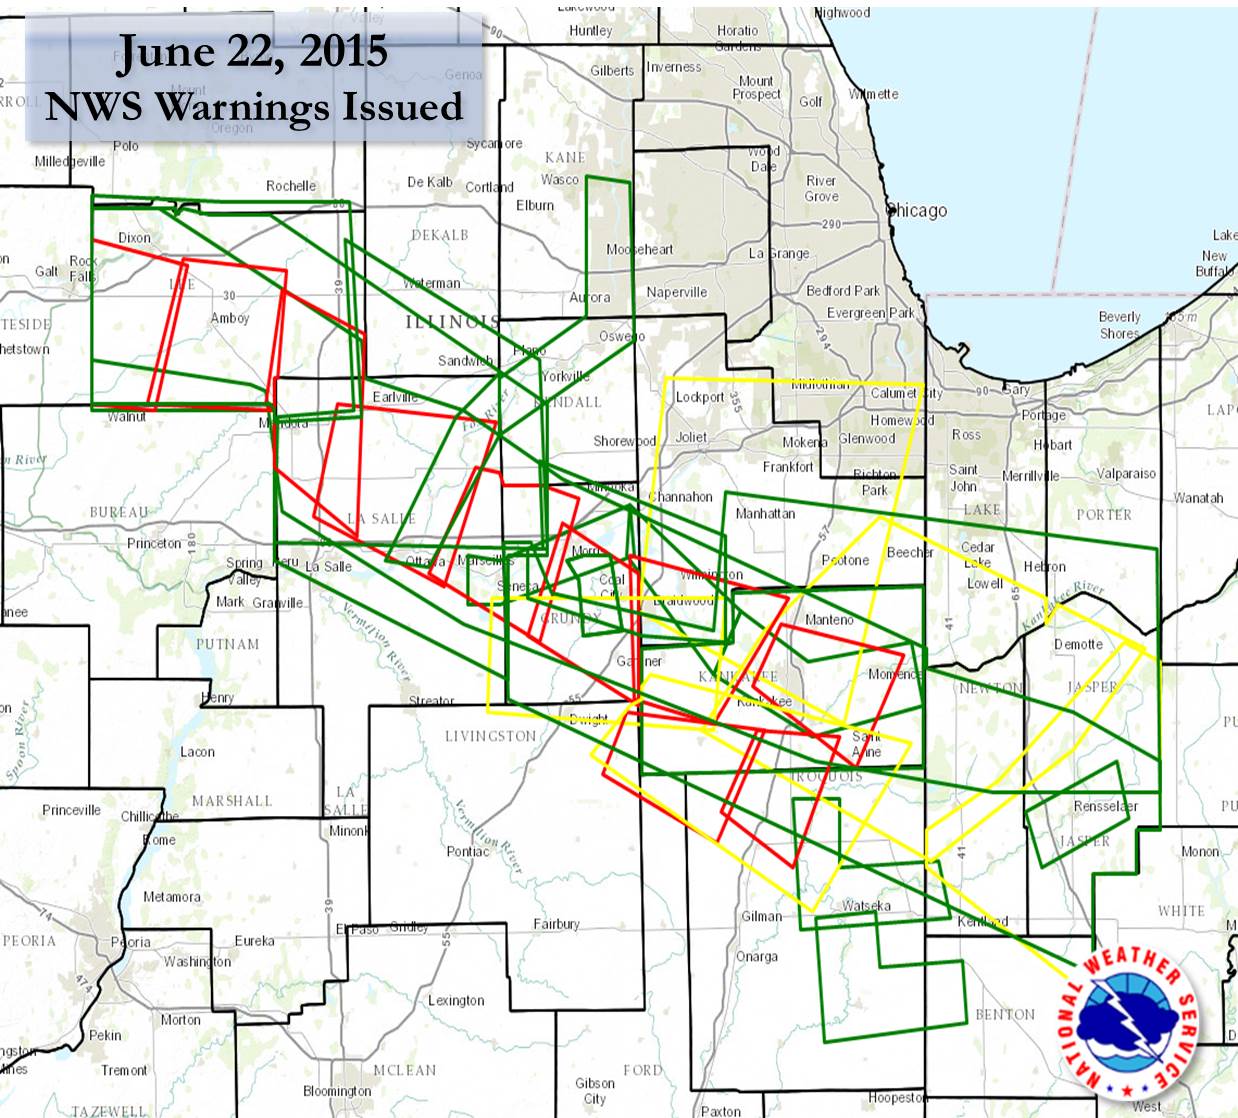 Summary of Warnings Issued from NWS Chicago on June 22nd 2015